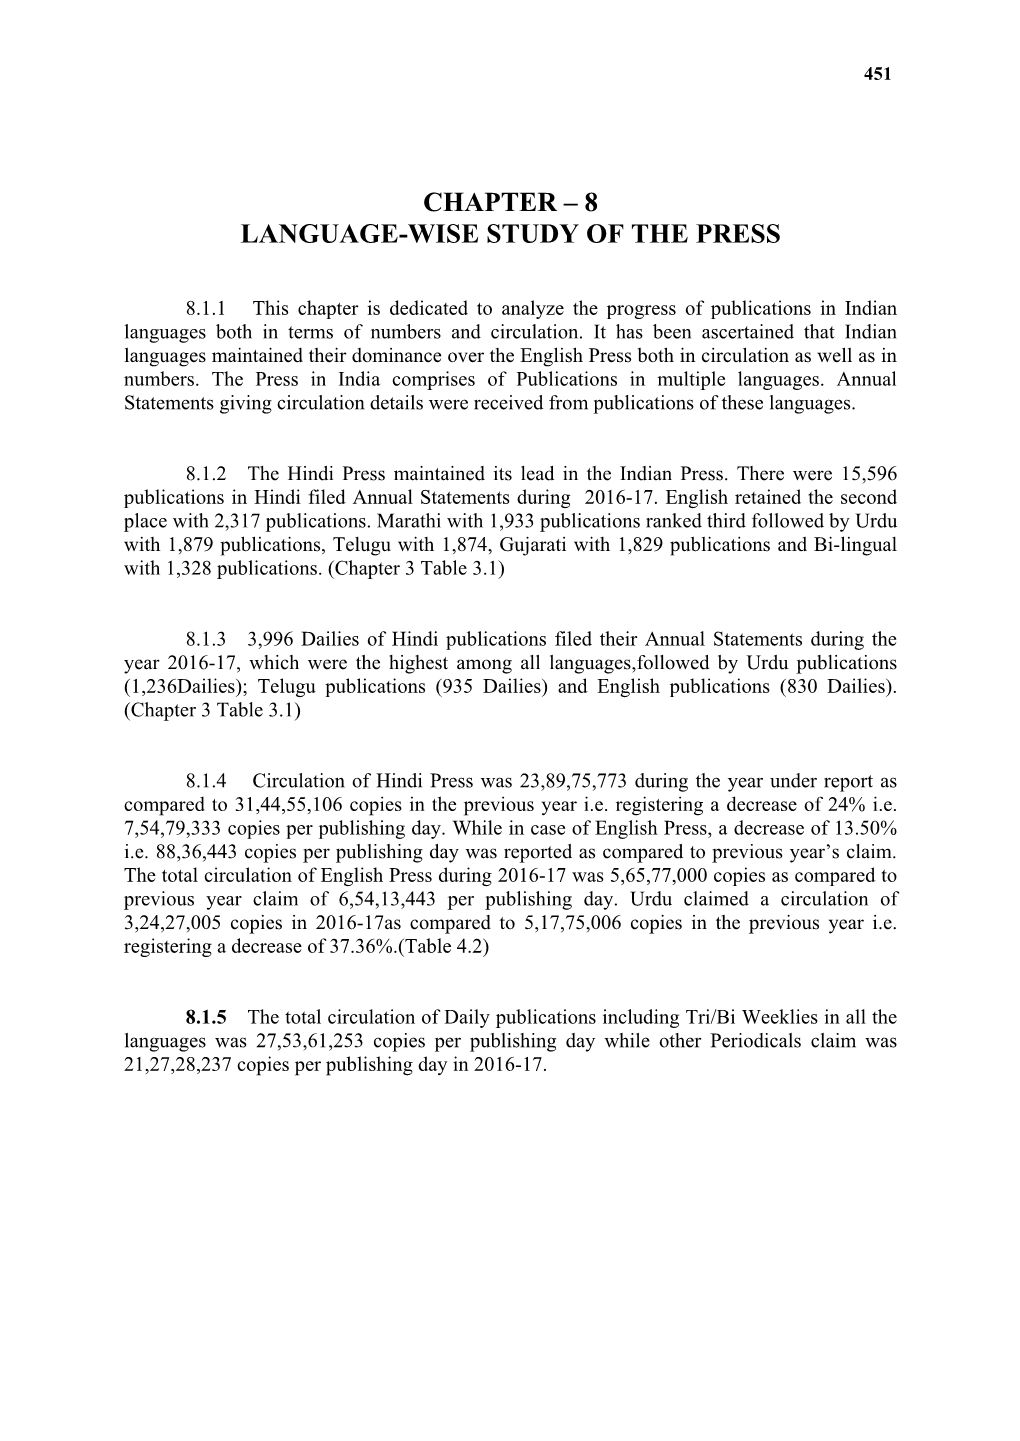 Chapter – 8 Language-Wise Study of the Press